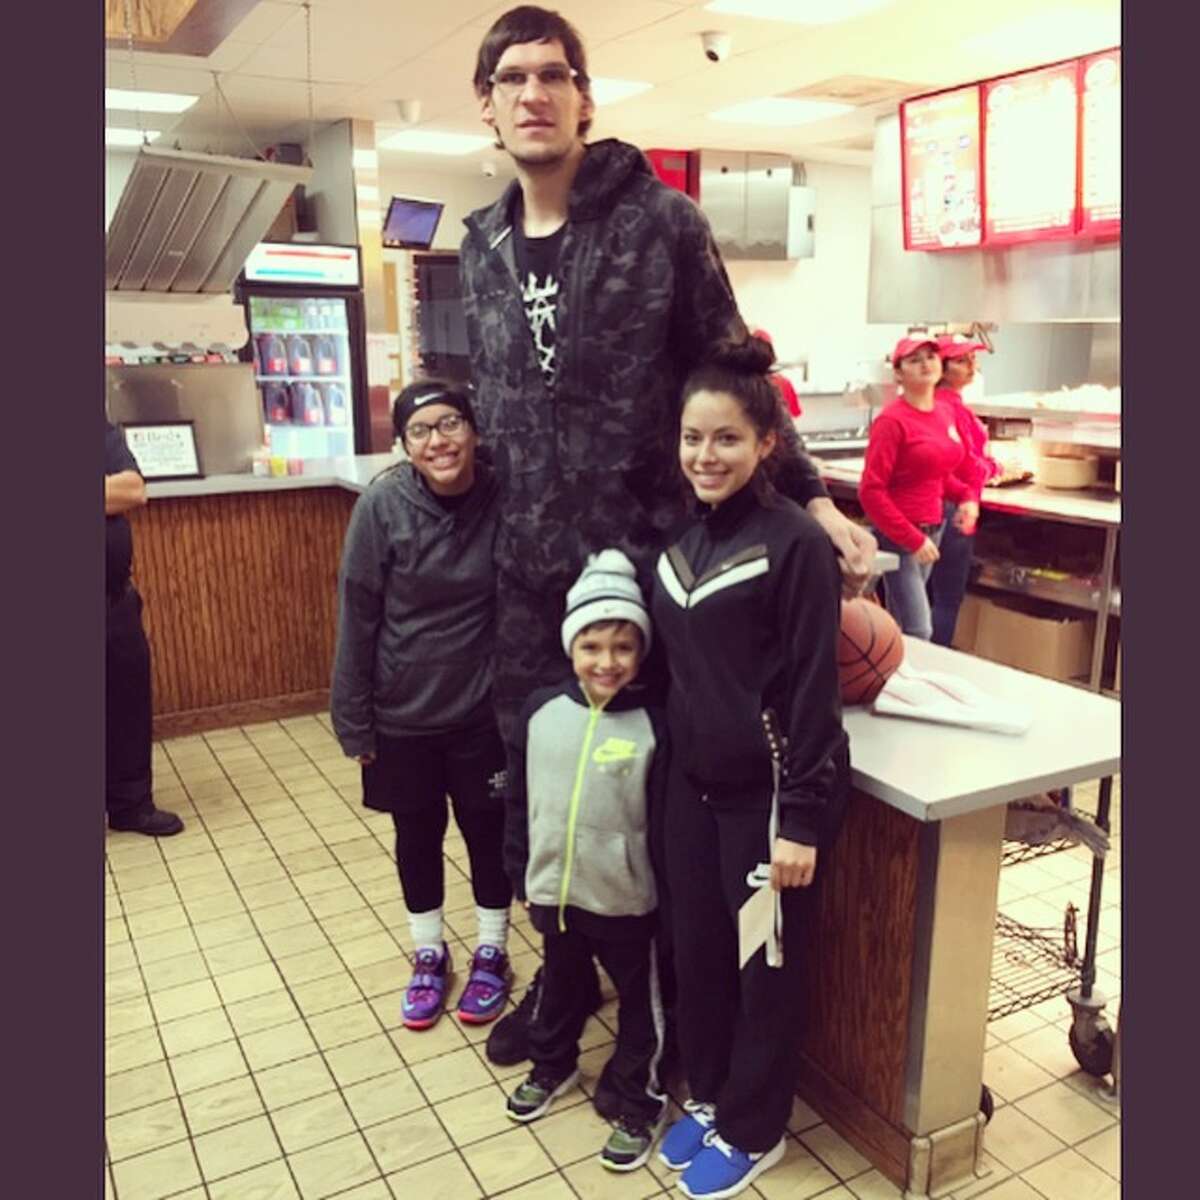 Are UNO cards in Boban Marjanovic's giant hand REALLY that tiny